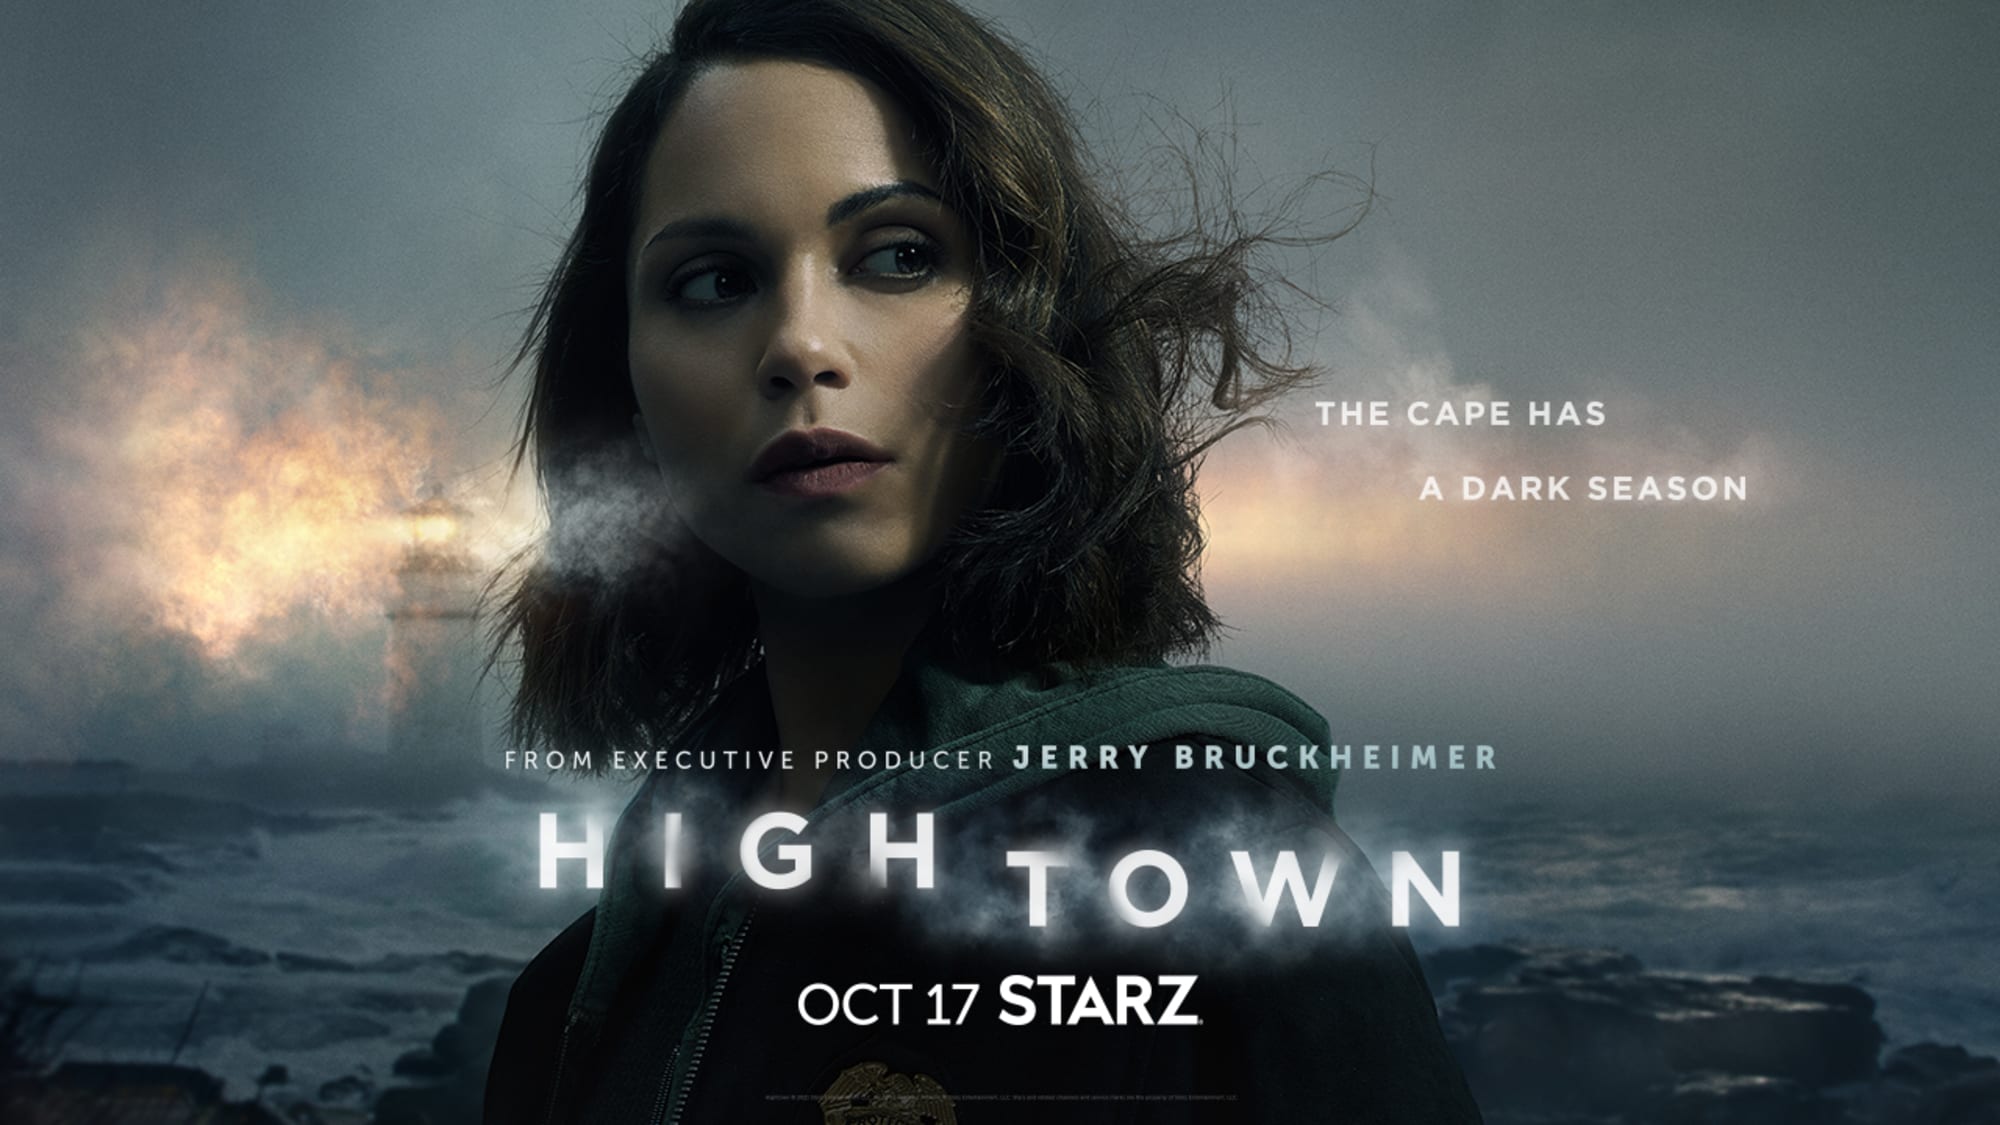 Hightown Season 2 trailer, key art, synopsis, release date, and more